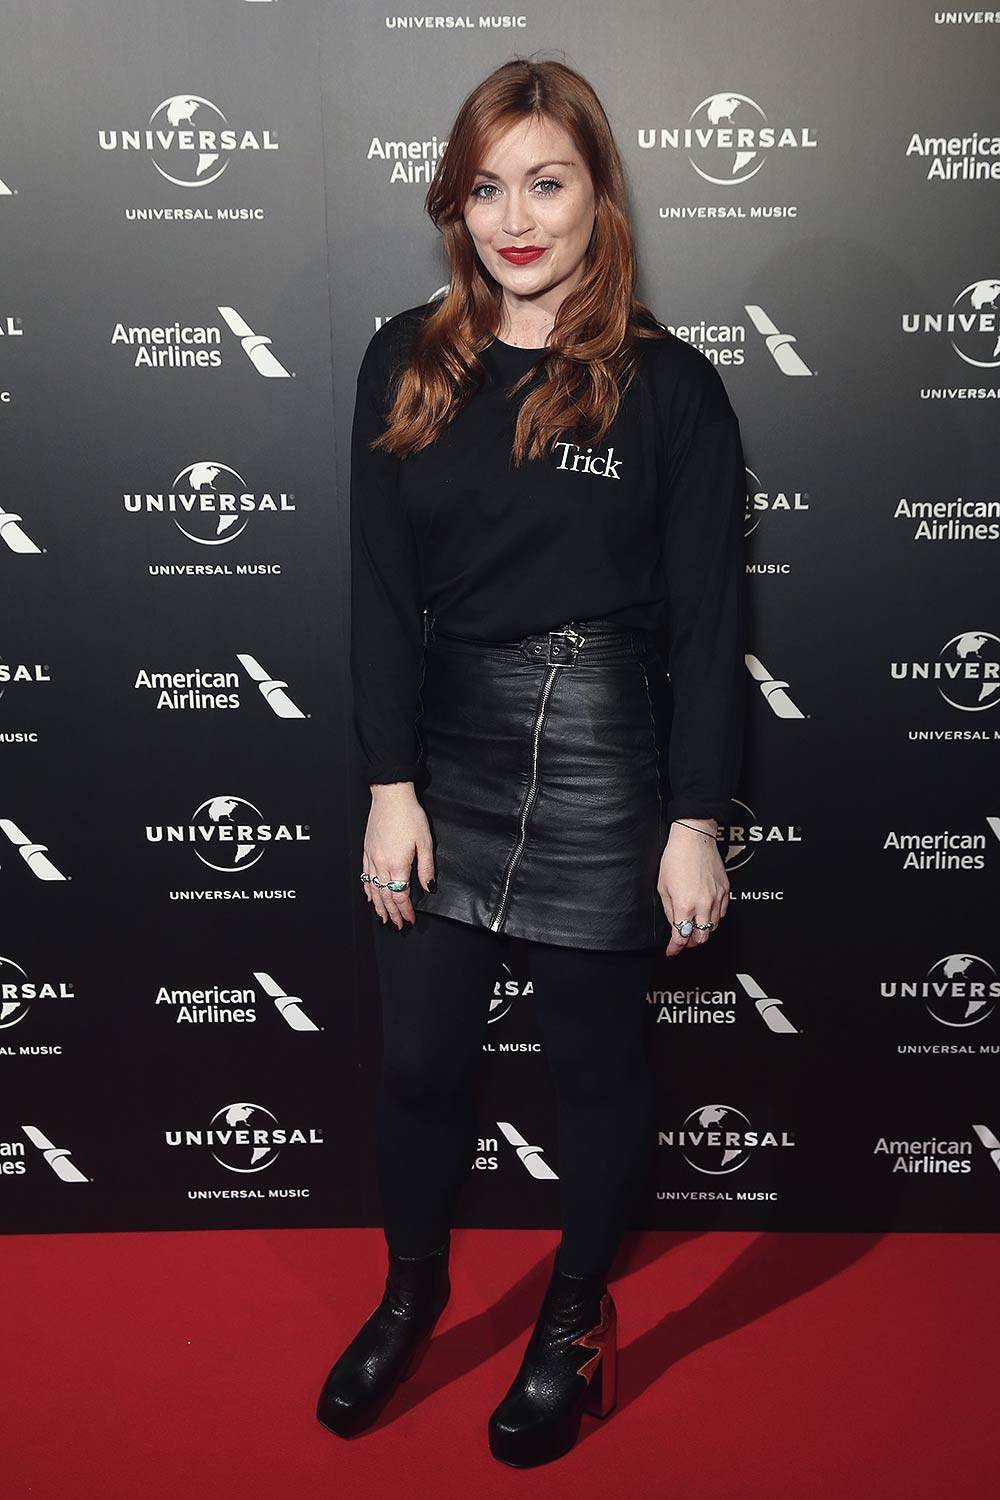 Arielle Free attends the Universal Music pre-BRIT Award party